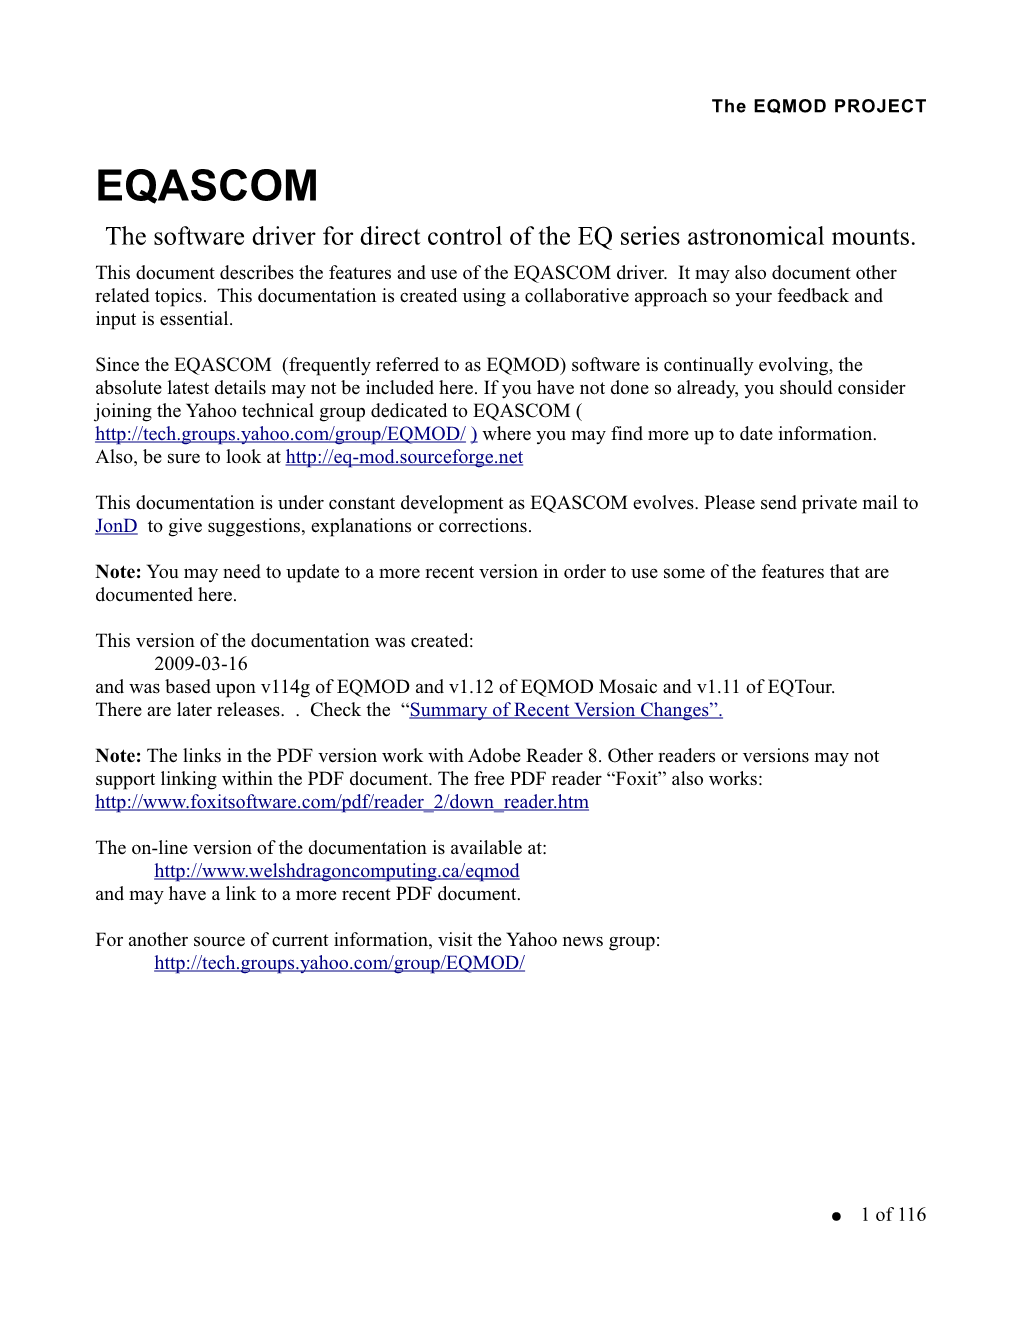 EQASCOM the Software Driver for Direct Control of the EQ Series Astronomical Mounts